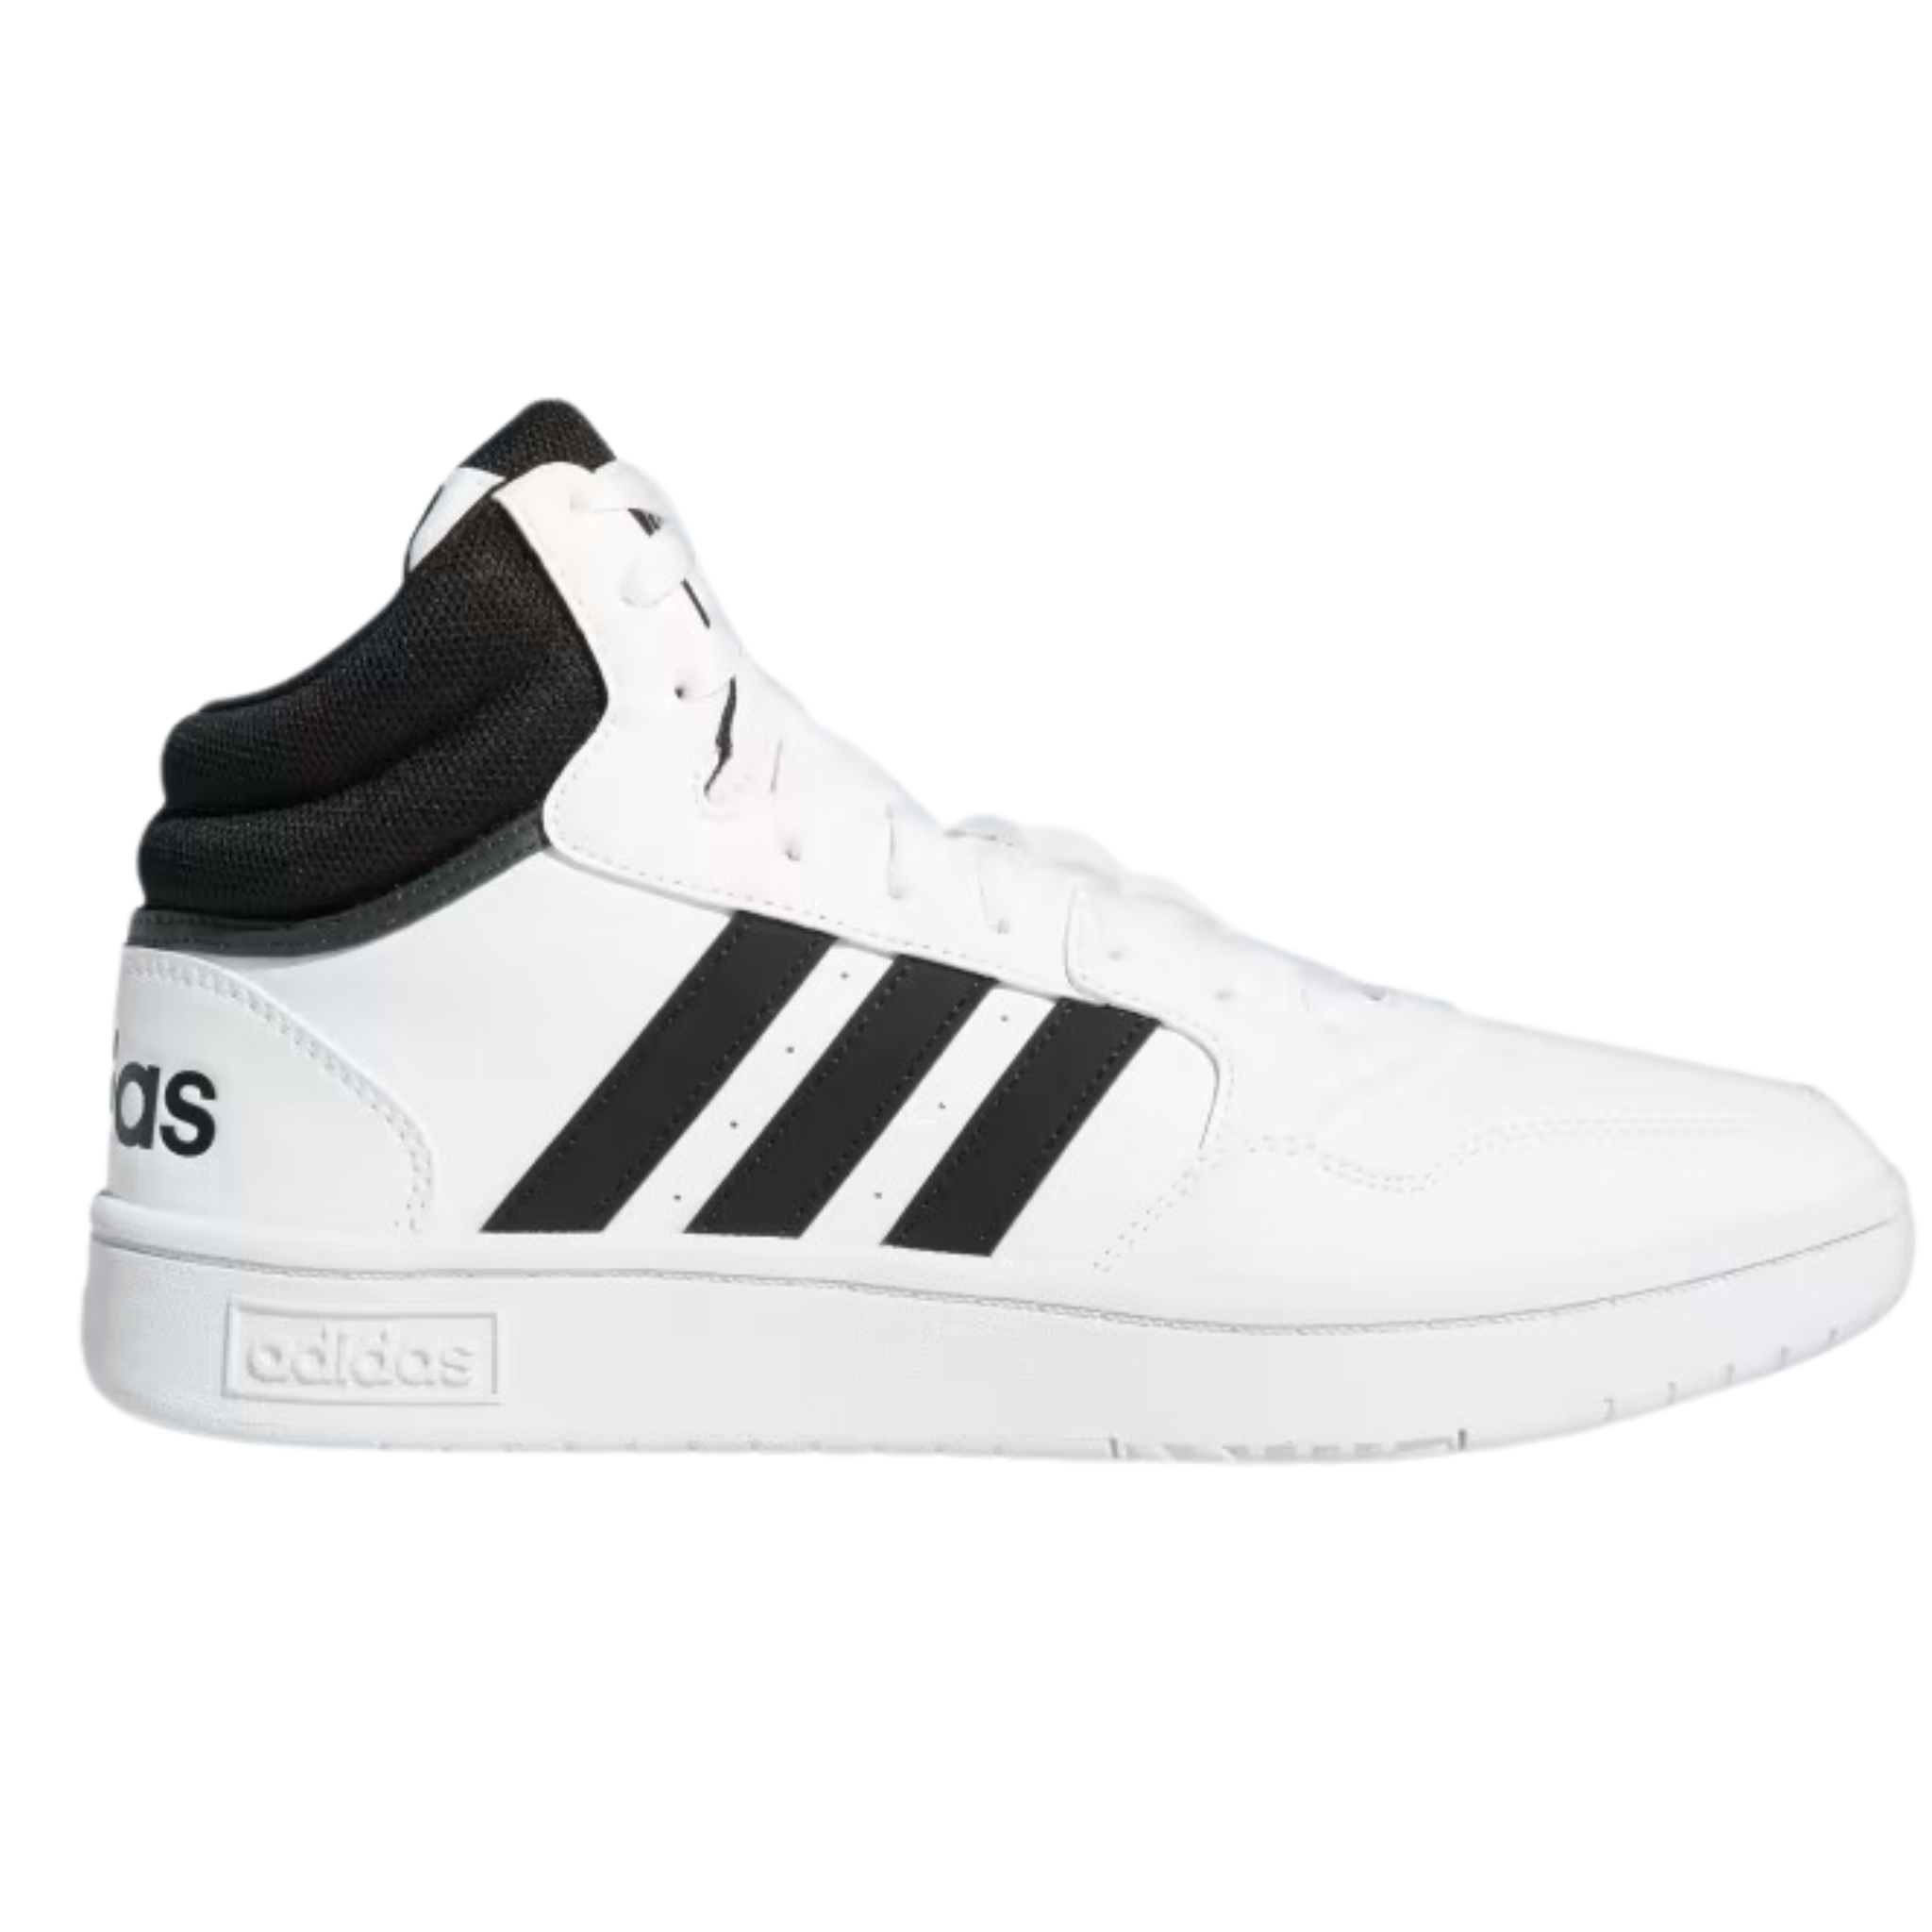 adidas Summer Sale: Men's Hoops 3.0 Mid Classic Vintage Shoes